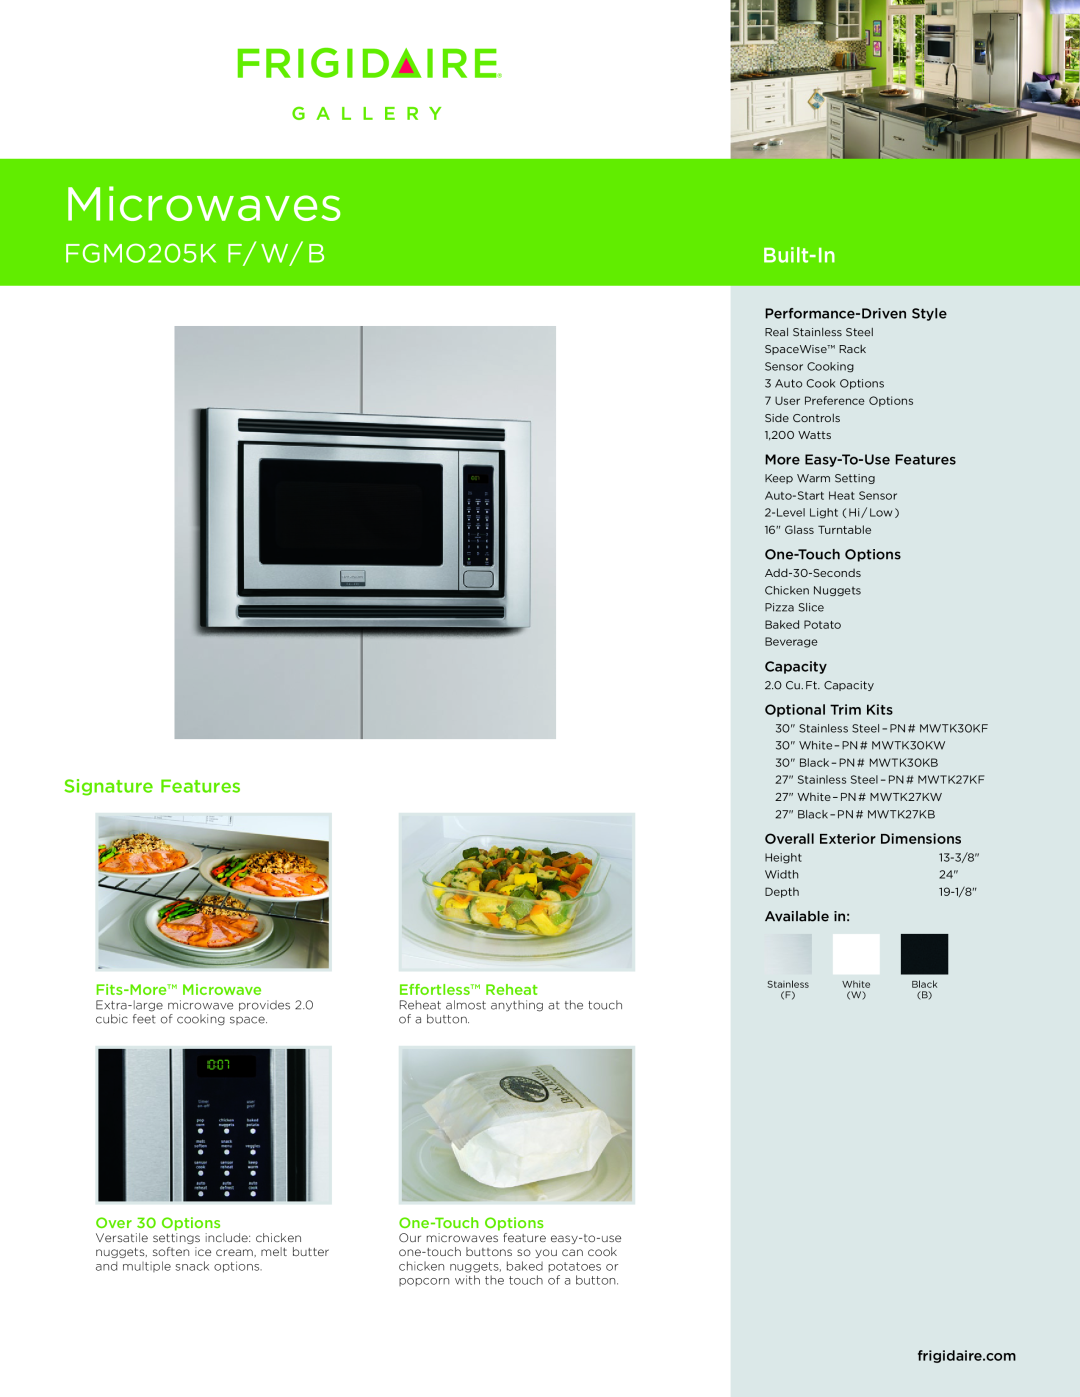 Frigidaire FGMO205K manual Fits-MoreMicrowave, Effortless Reheat, Over 30 Options, One-TouchOptions, Product Dimensions 